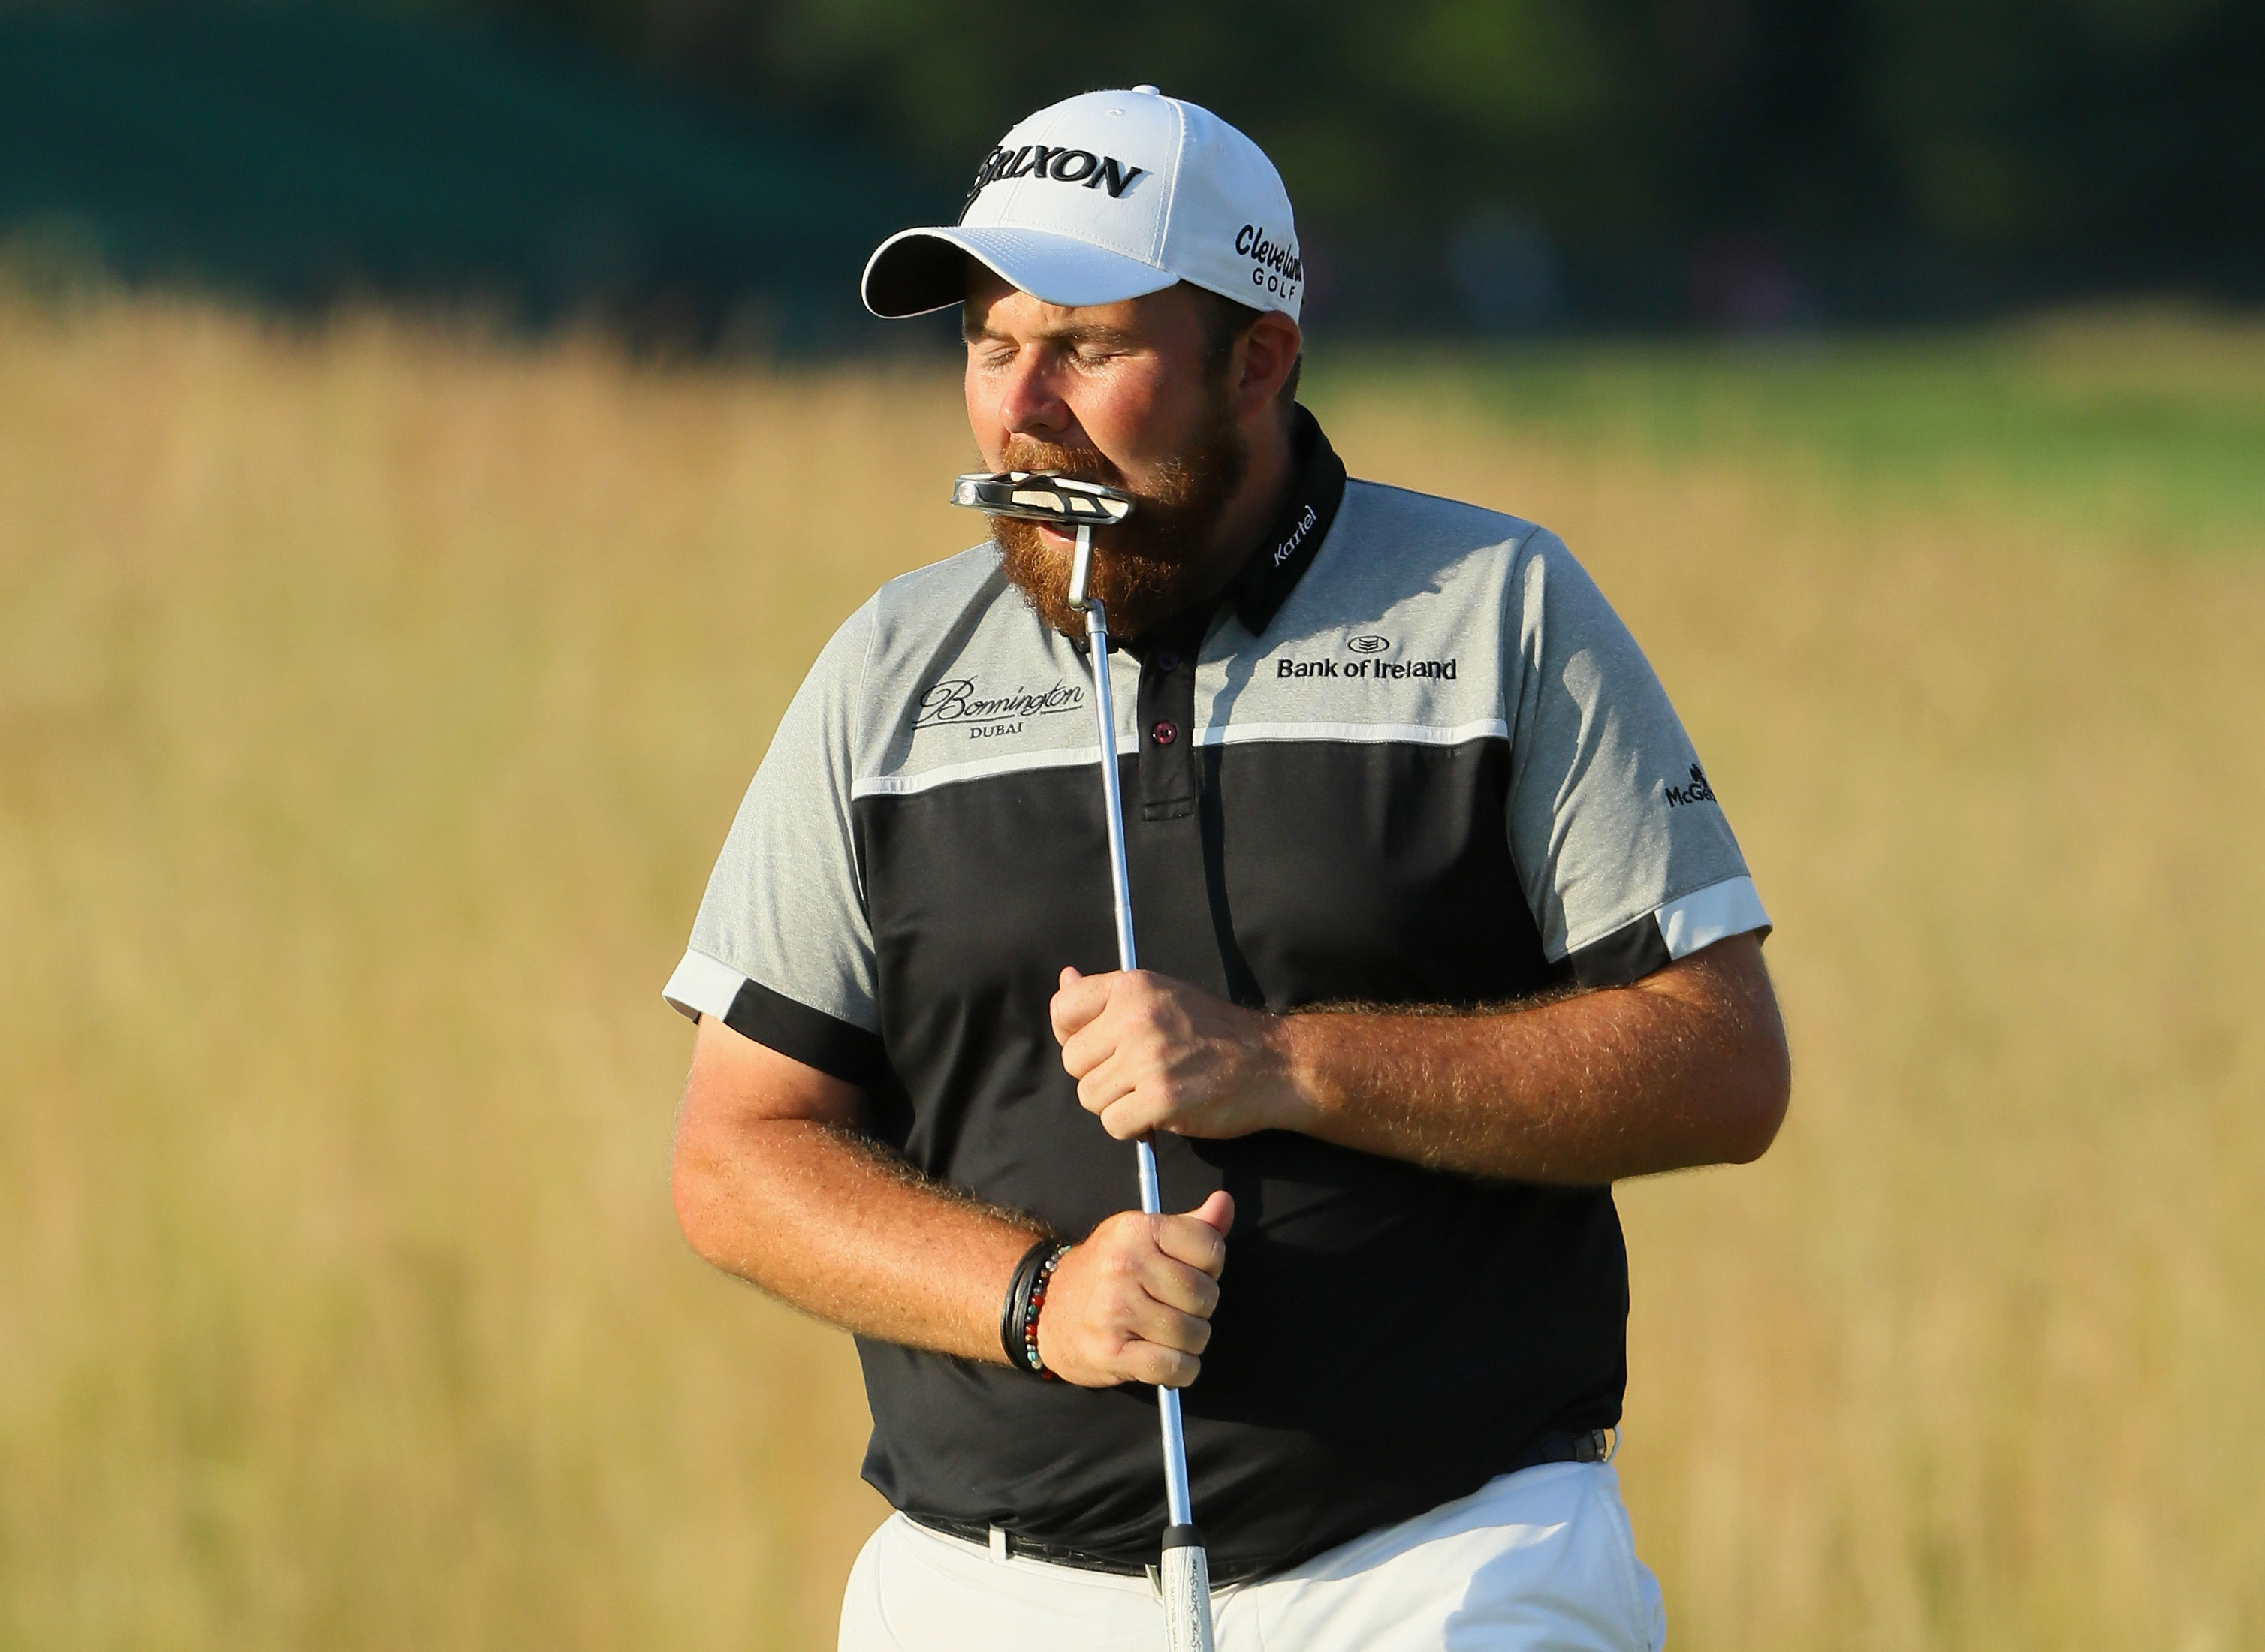 British Open 2019 Yes, Shane Lowry once lost a four-shot lead Sunday at a major